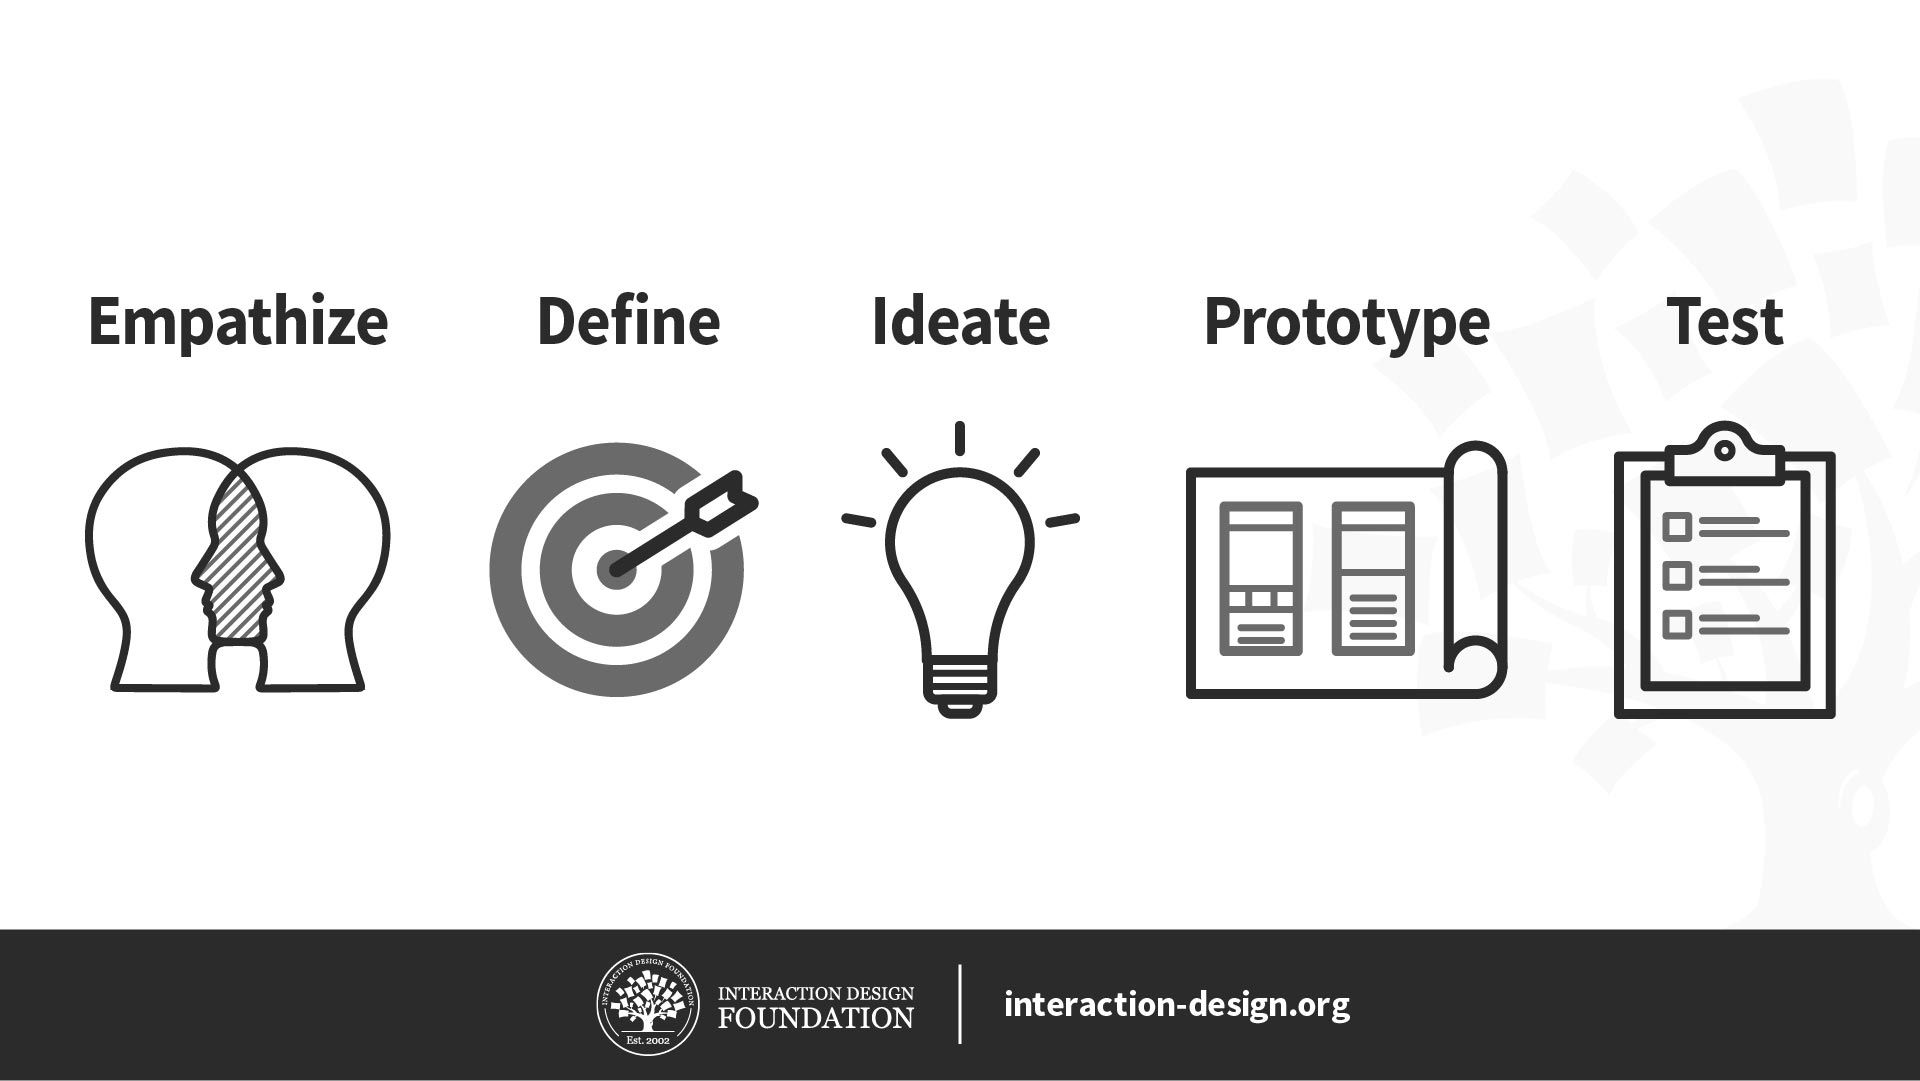 Illustration of the 5-Stages of the Design Process: Empathize, Define, Ideate, Prototype, Test.